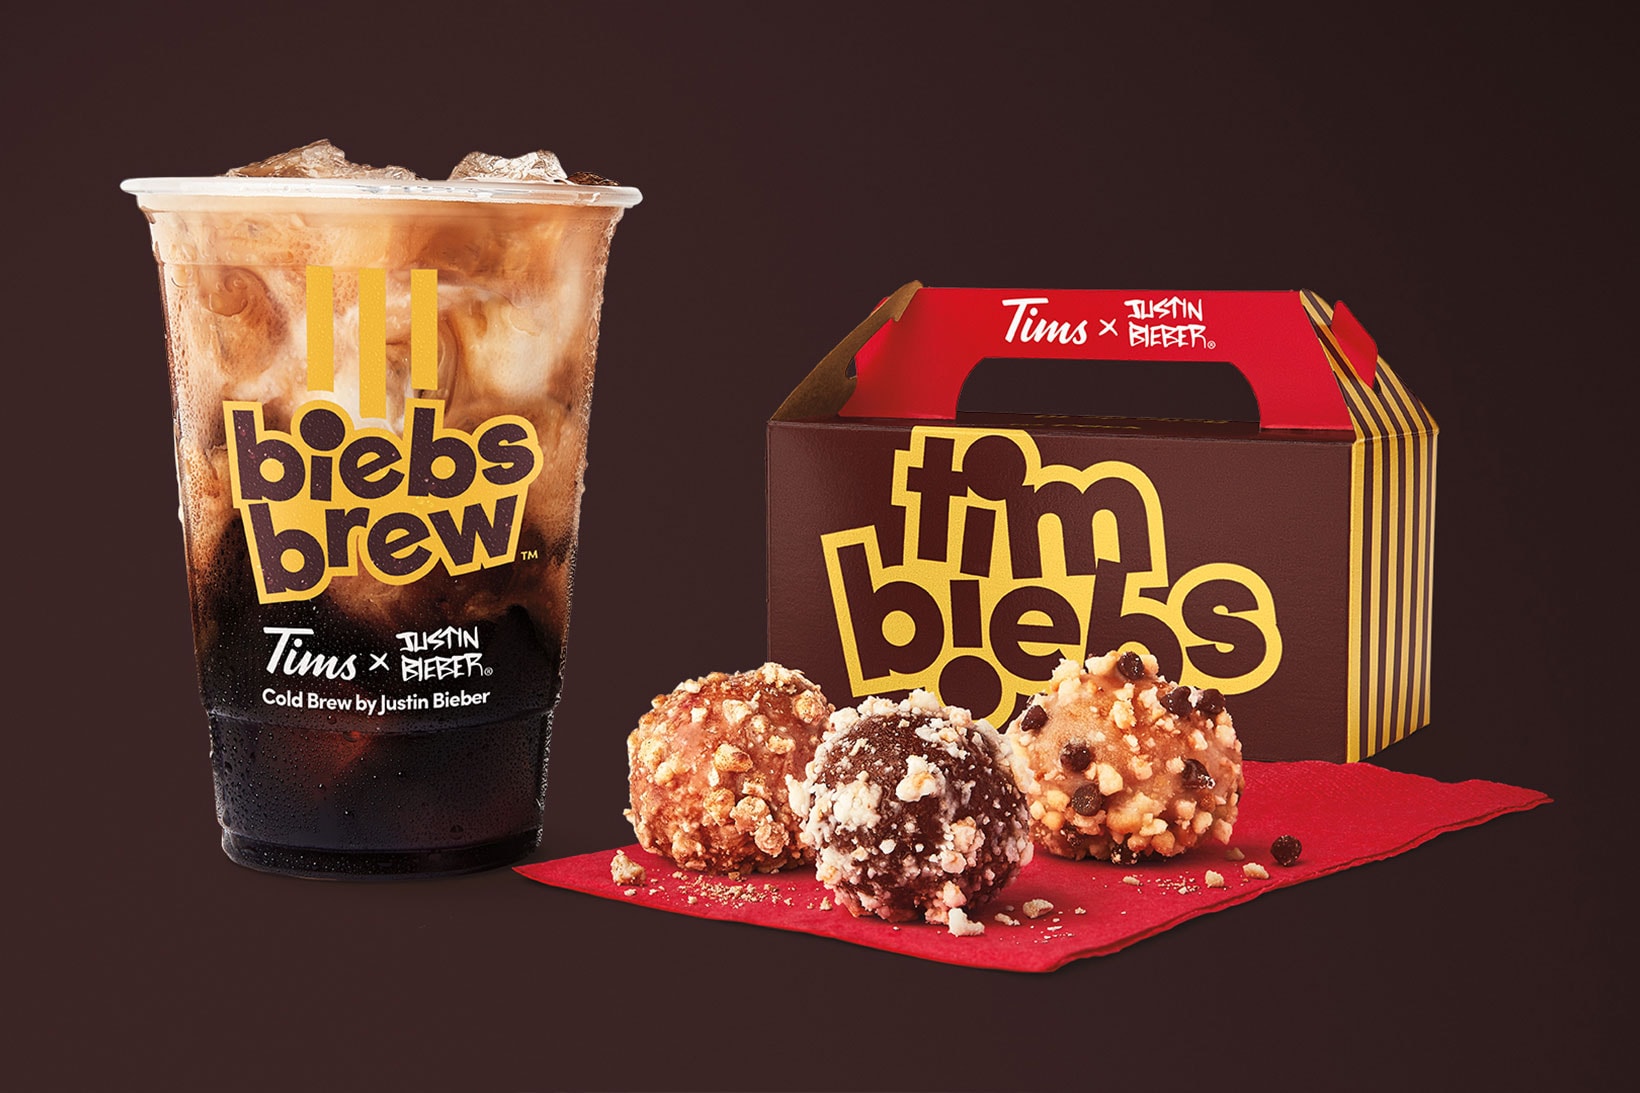 Justin Bieber Tim Hortons Biebs Brew Coffee French Vanilla Launch Where to buy